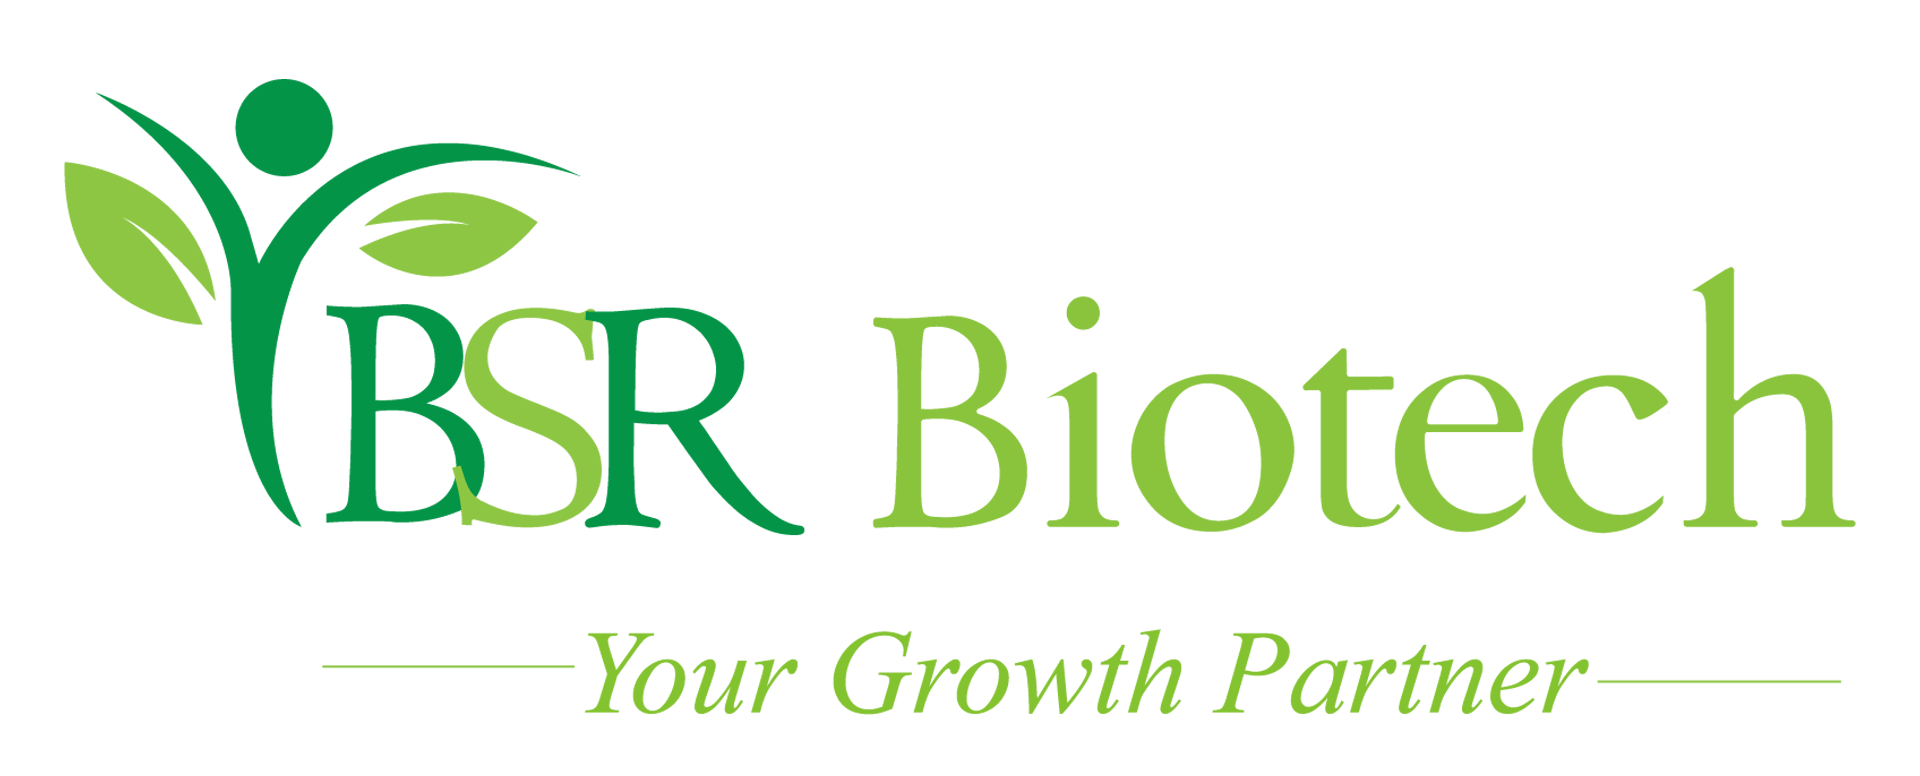 Covid 19 : BSR Biotech | Your Growth Partner